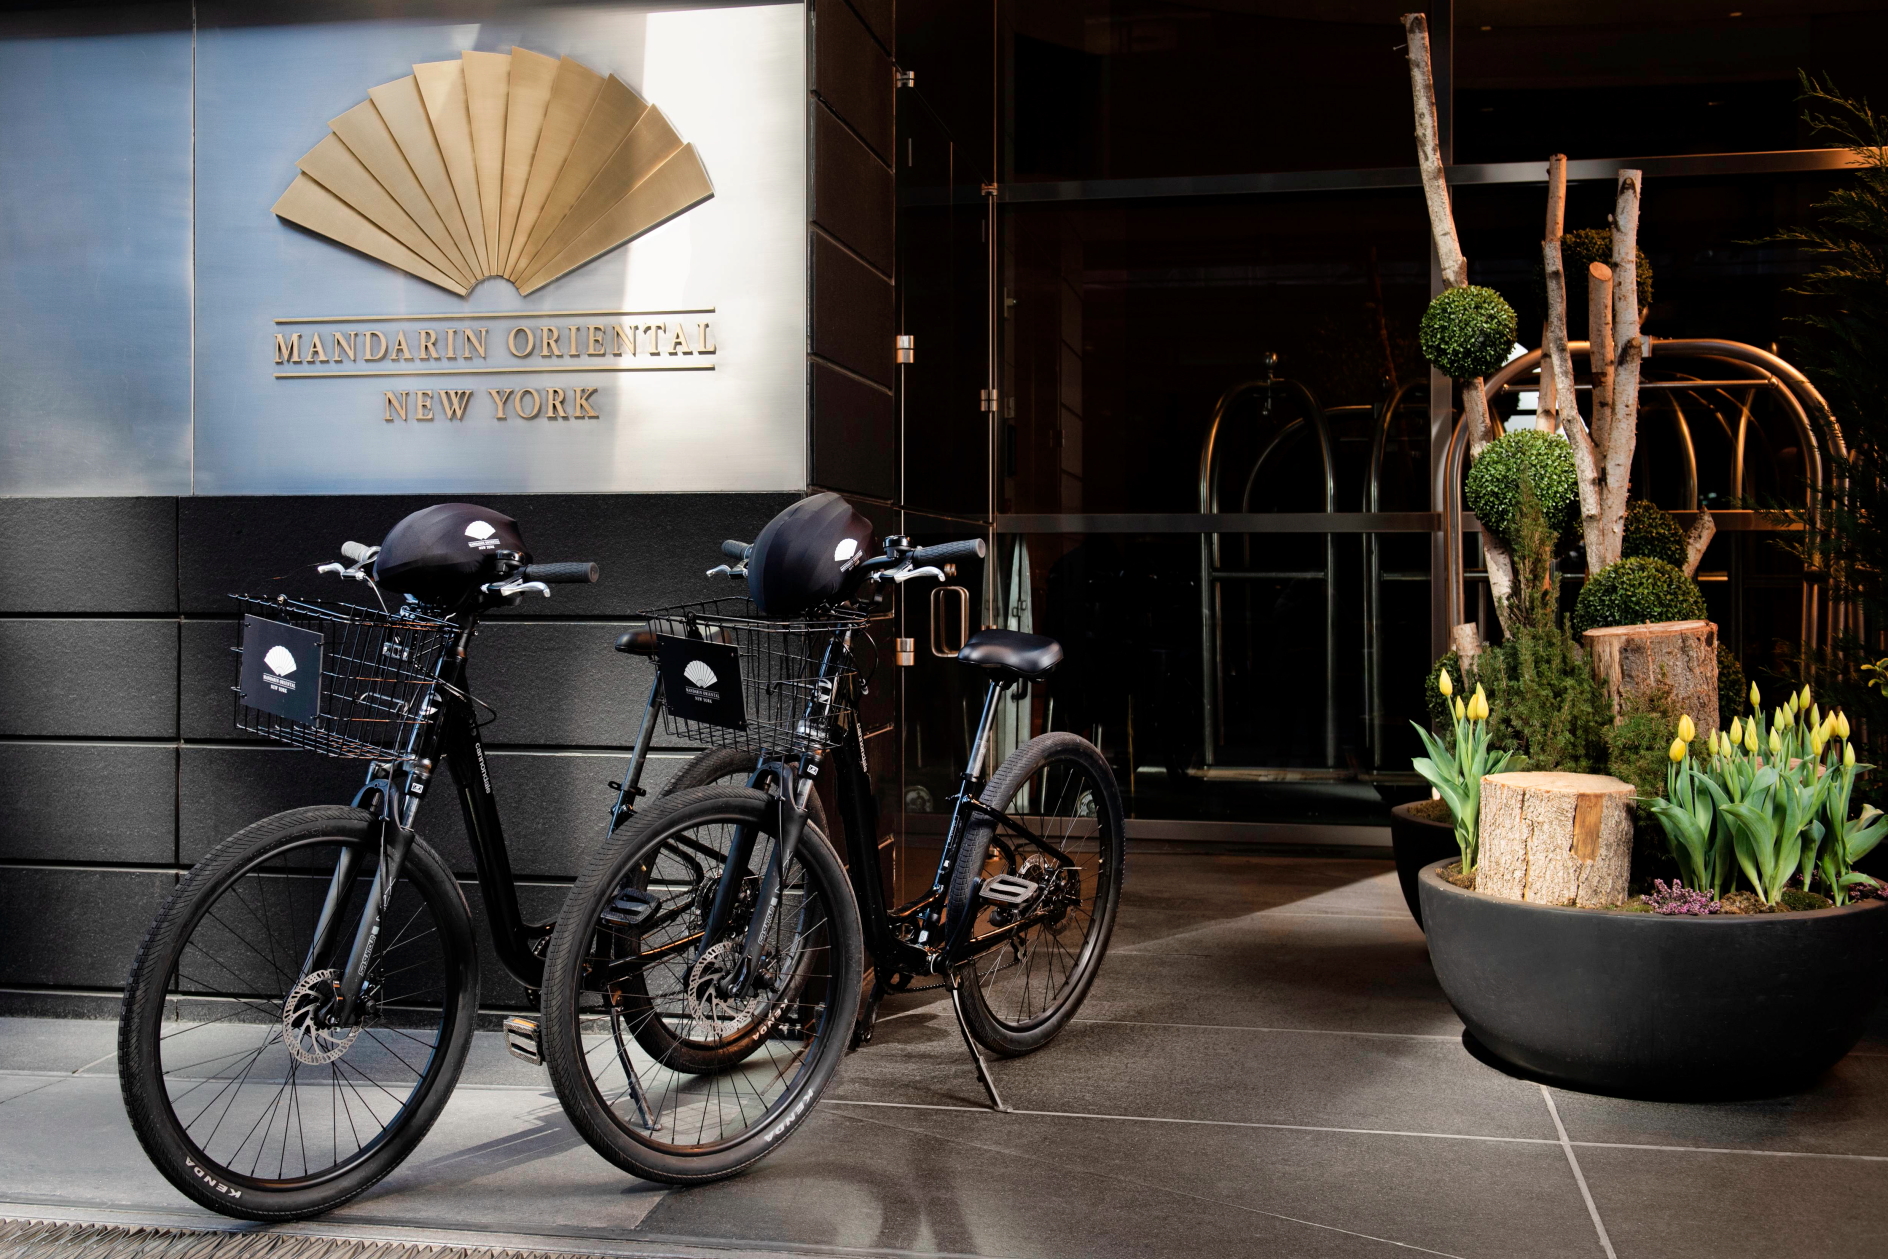 Mandarin Oriental is encouraging guests to explore New York City by bike. Click to enlarge.